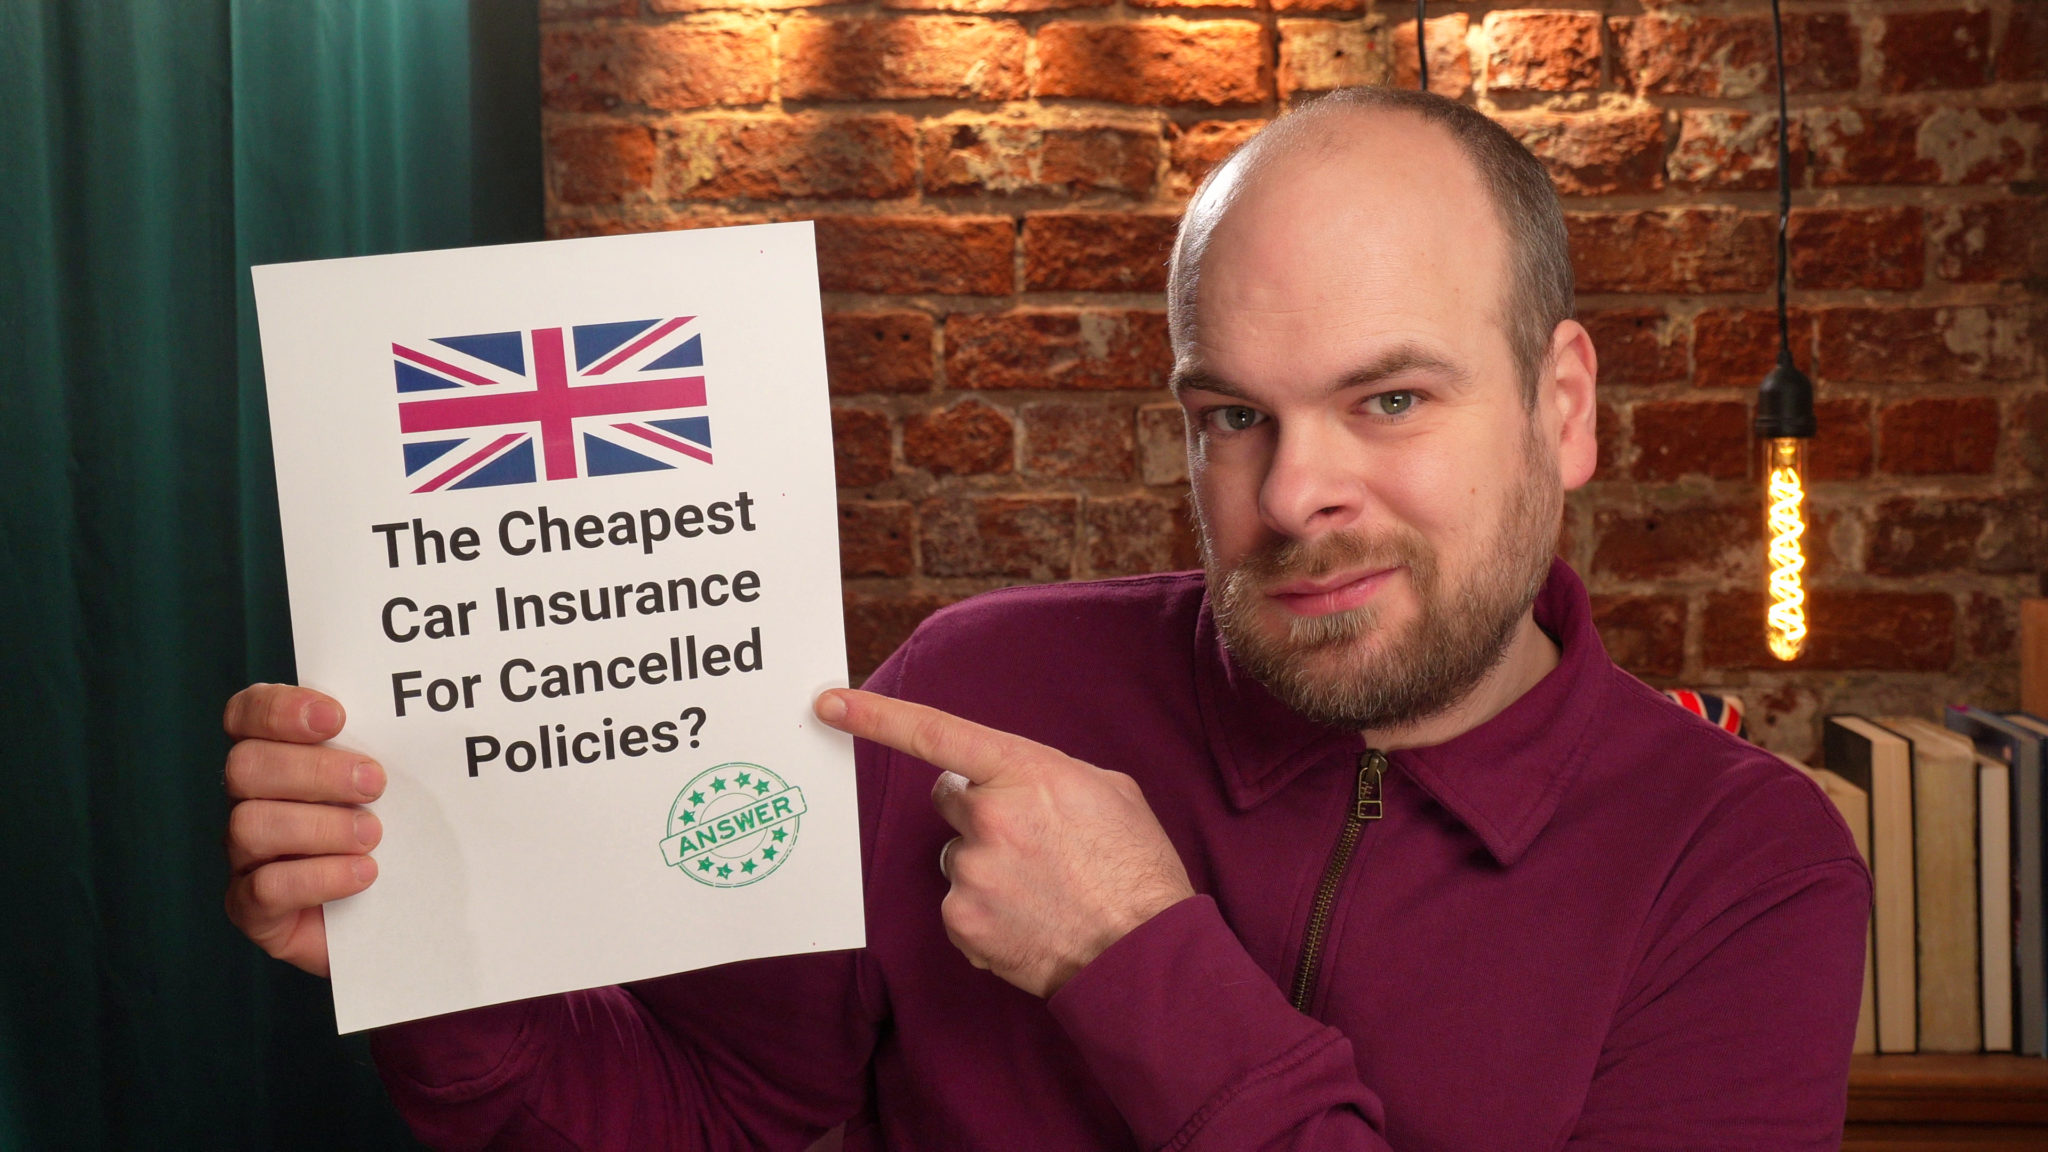 The Cheapest Car Insurance For Cancelled Policies?